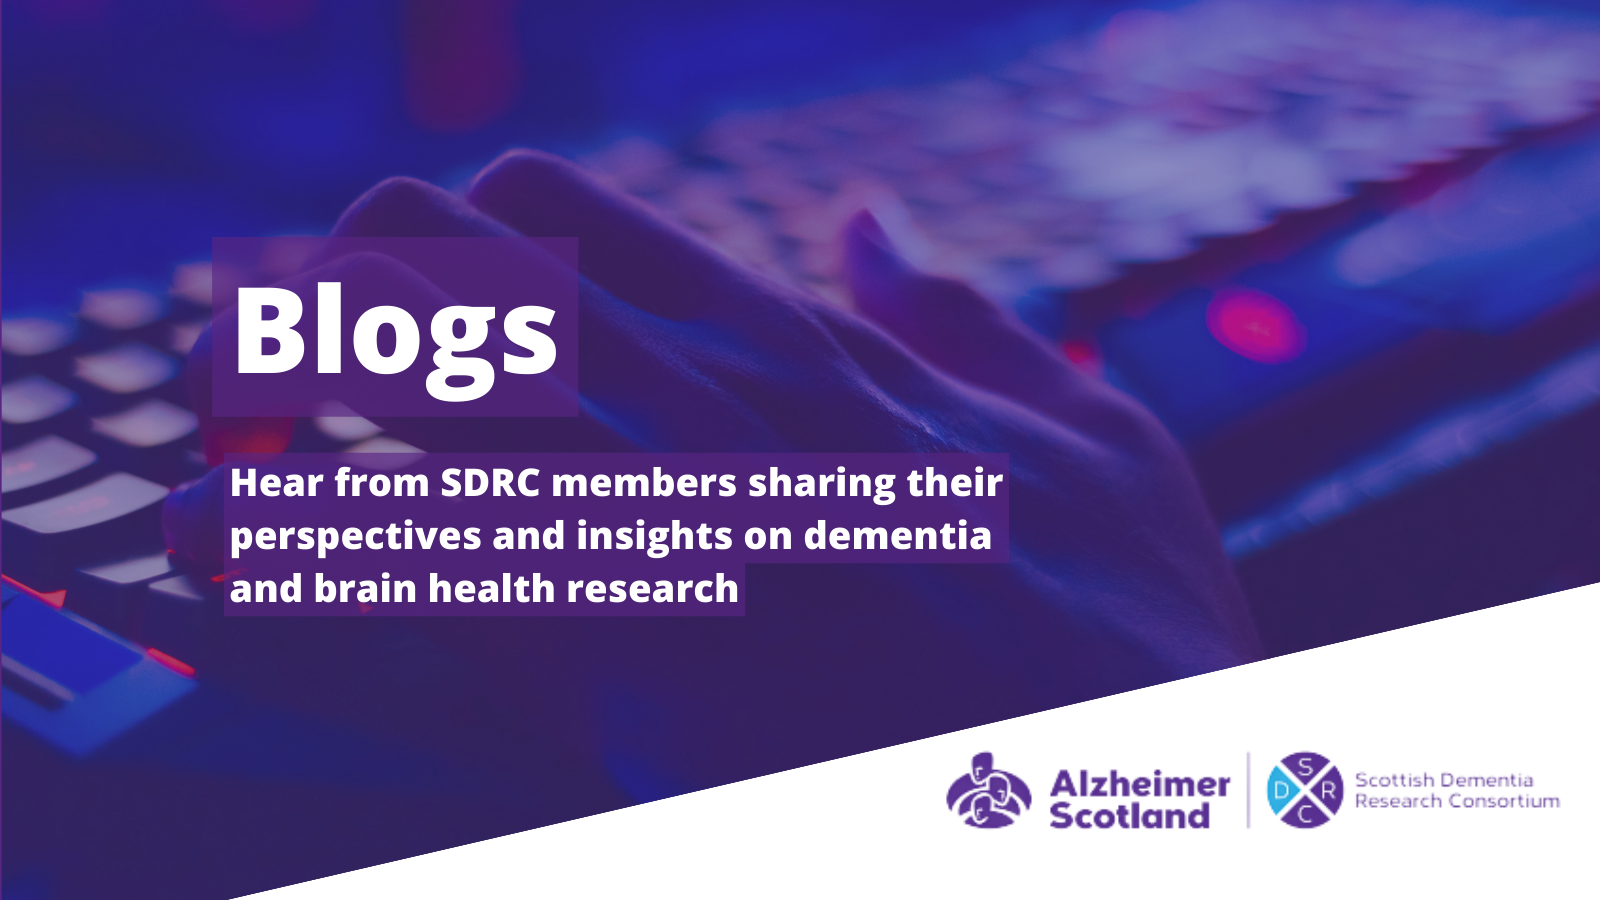 Do you have insights to share with other researchers? Write a blog for the SDRC!